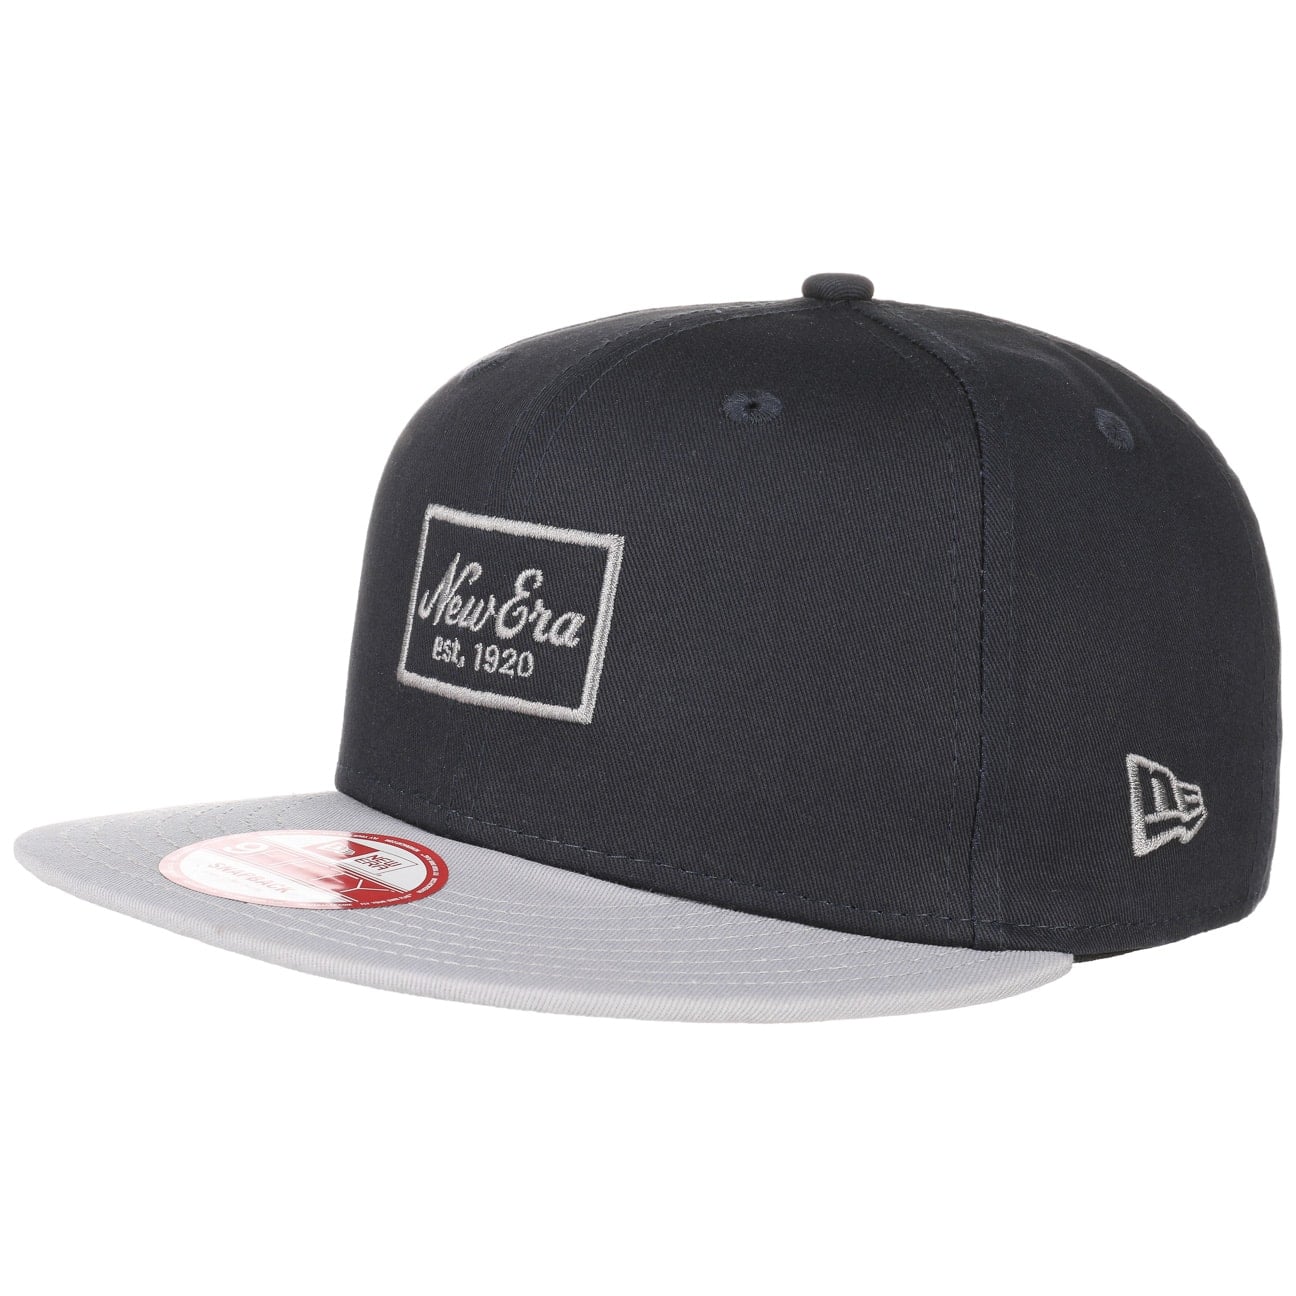 Patched Prime Snapback Cap by New Era, GBP 27,95 --> Hats, caps ...